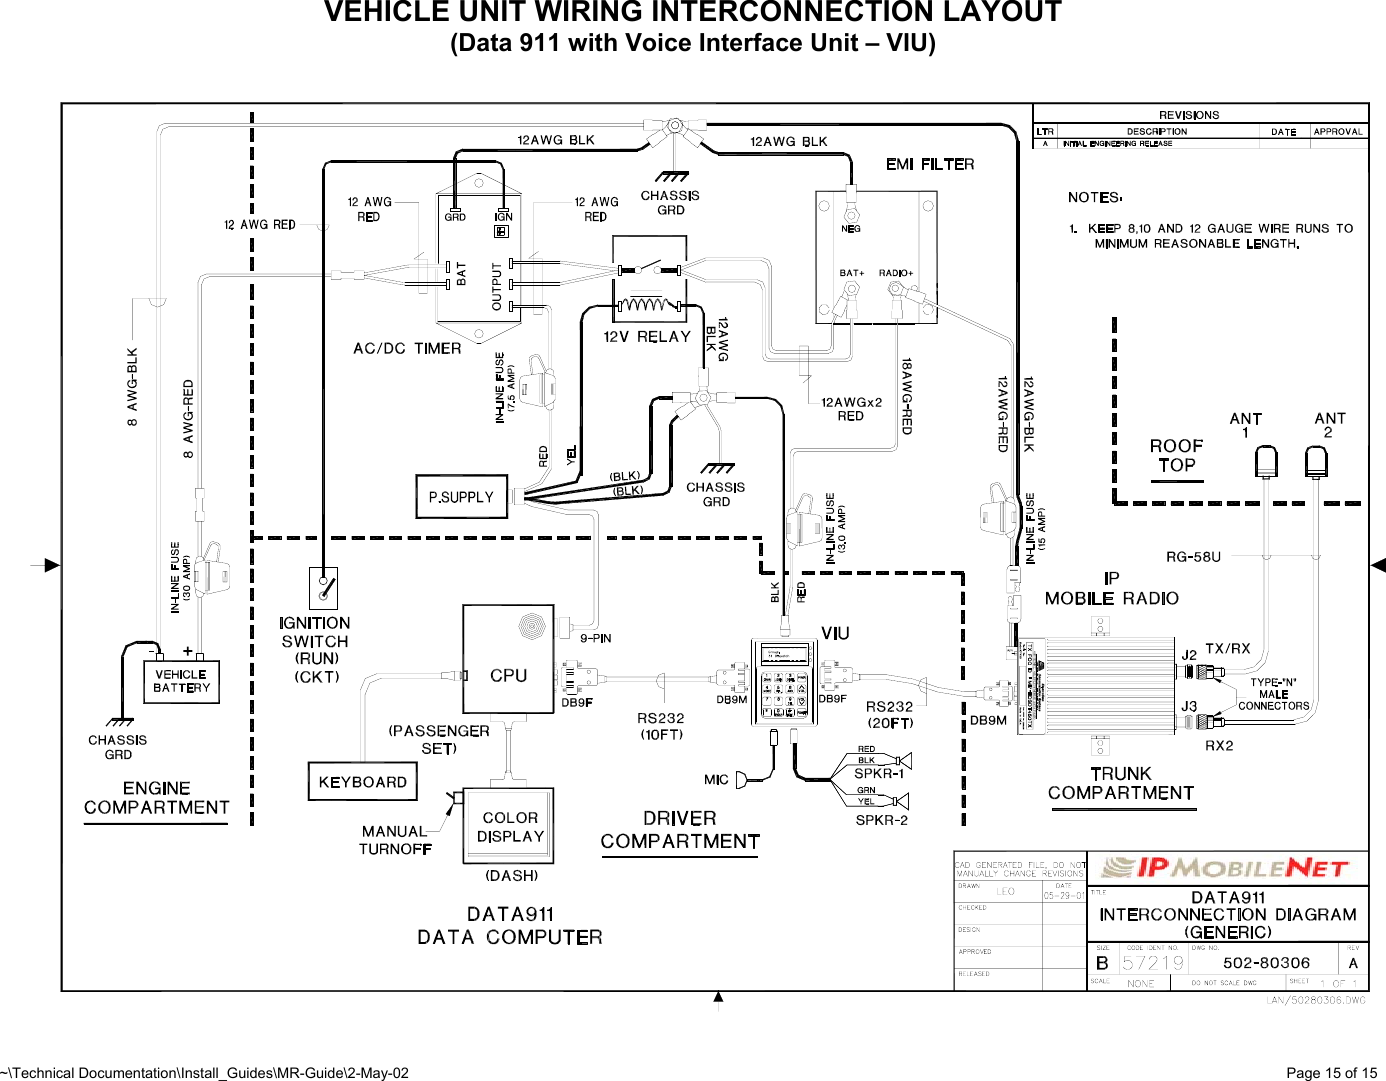 ~\Technical Documentation\Install_Guides\MR-Guide\2-May-02   Page 15 of 15 VEHICLE UNIT WIRING INTERCONNECTION LAYOUT (Data 911 with Voice Interface Unit – VIU)  400 −512ΜΗζ  ∗∆ΙςΕΡΣΙΤΨ ΜΟΒΙΛΕ ∆ΑΤΑ ΡΑ∆ΙΟ